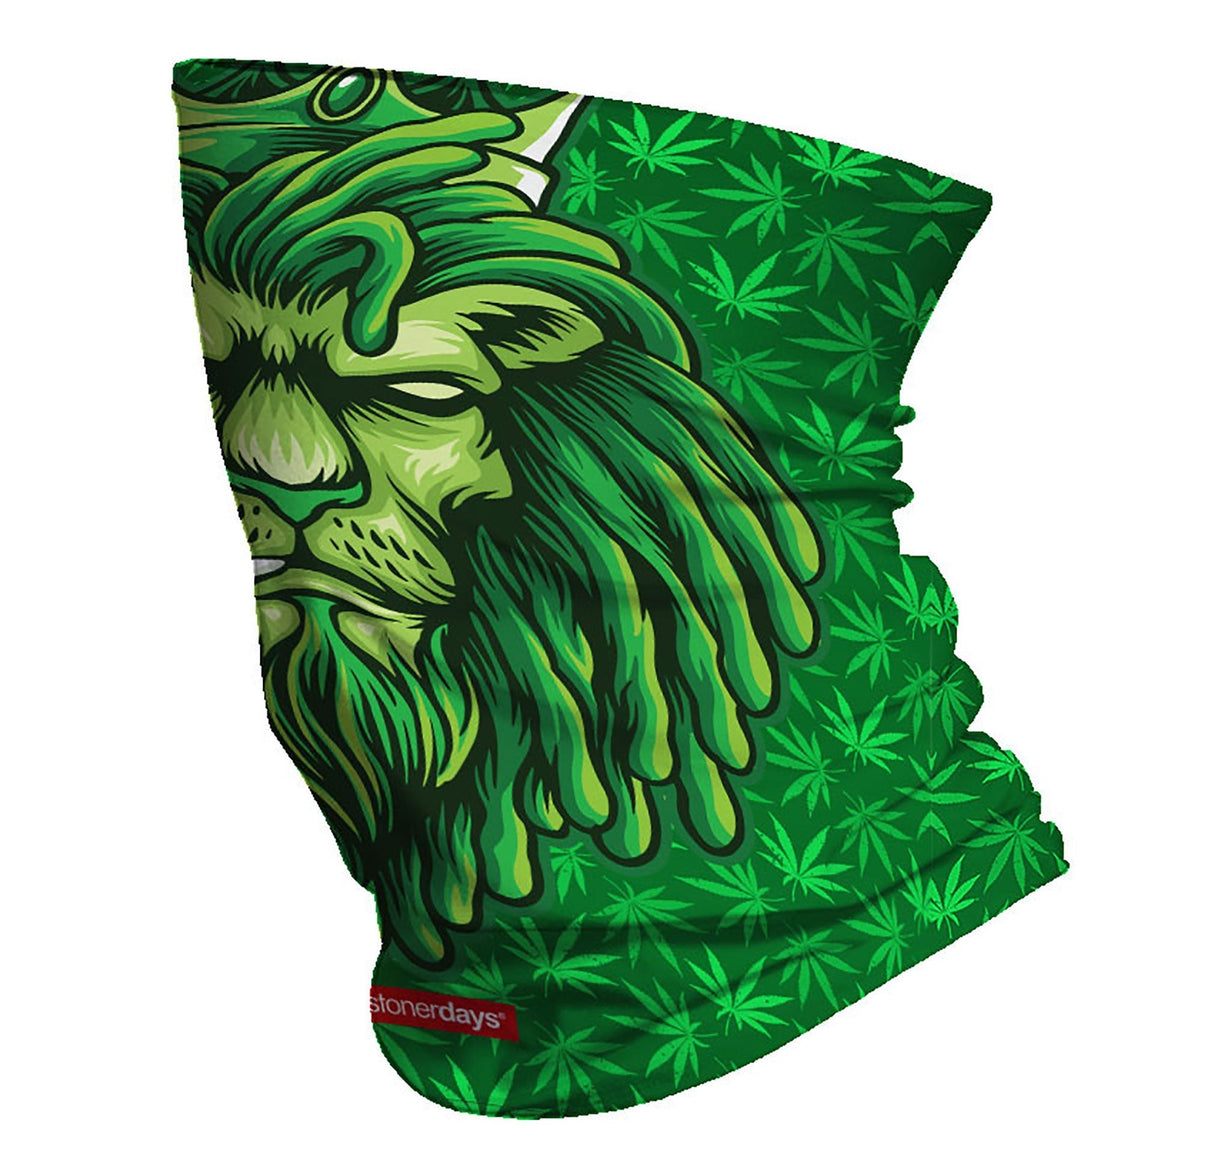 StonerDays Philly Blunts Neck Gaiter featuring vibrant cannabis leaf design and lion graphic